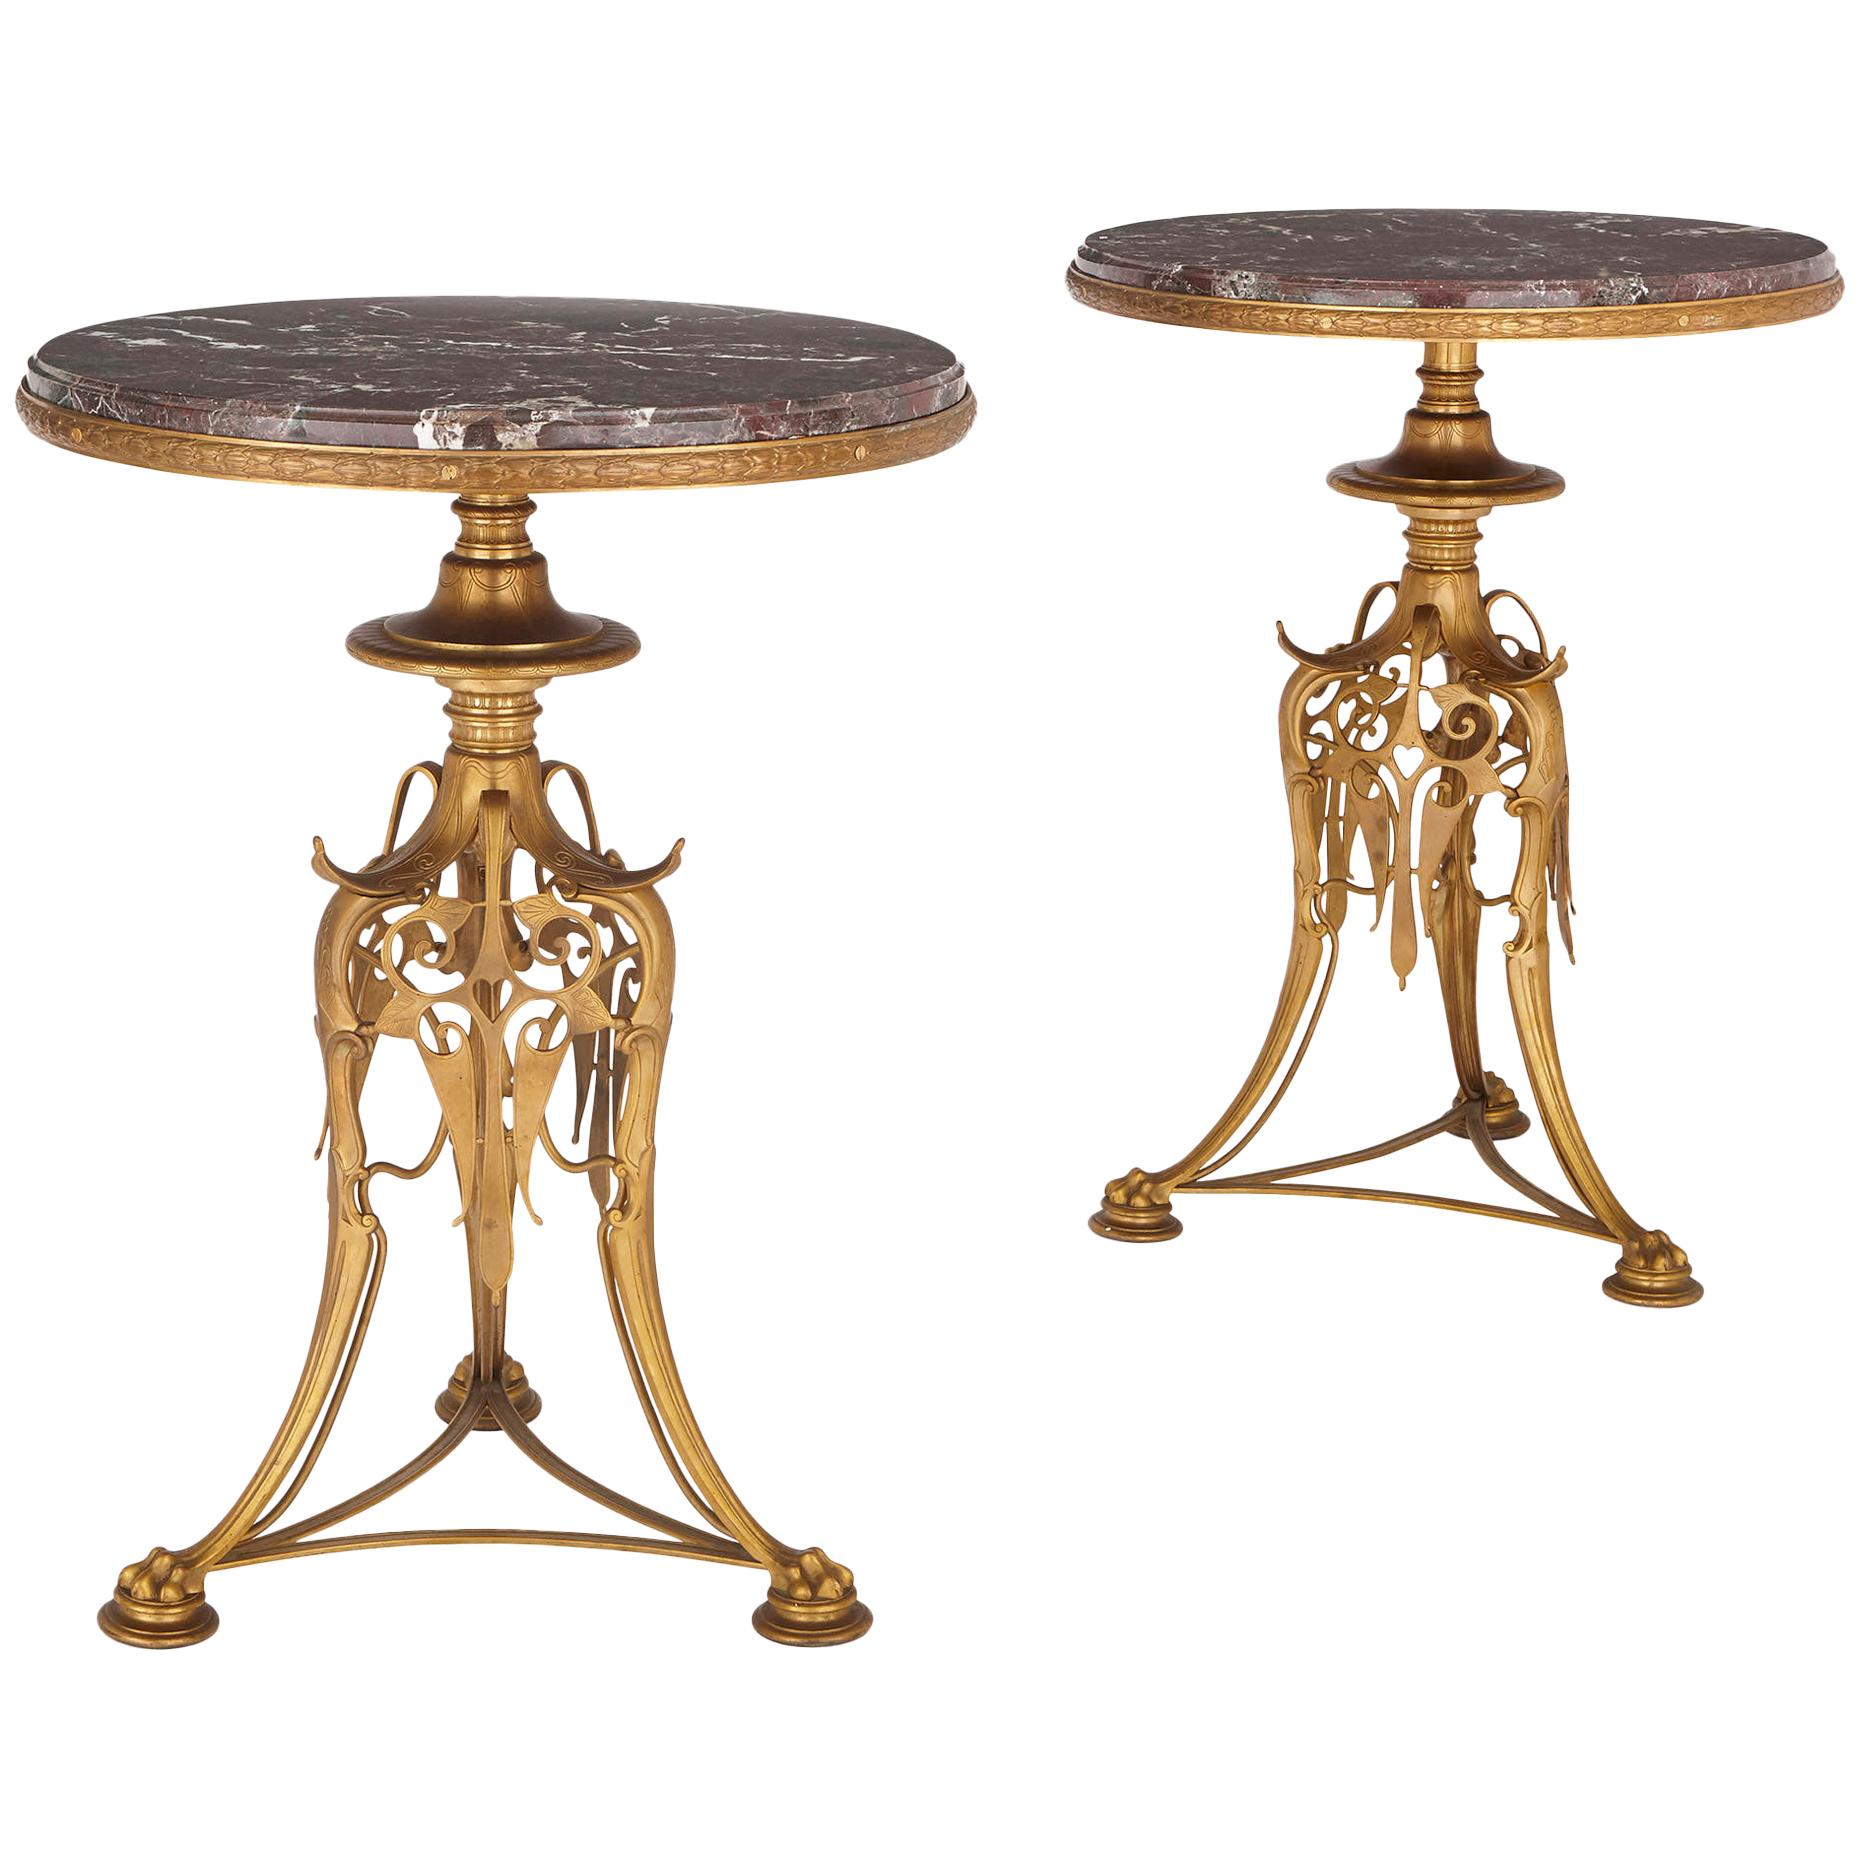 Two 19th Century Gilt Bronze and Marble Round Tables by Barbedienne For Sale